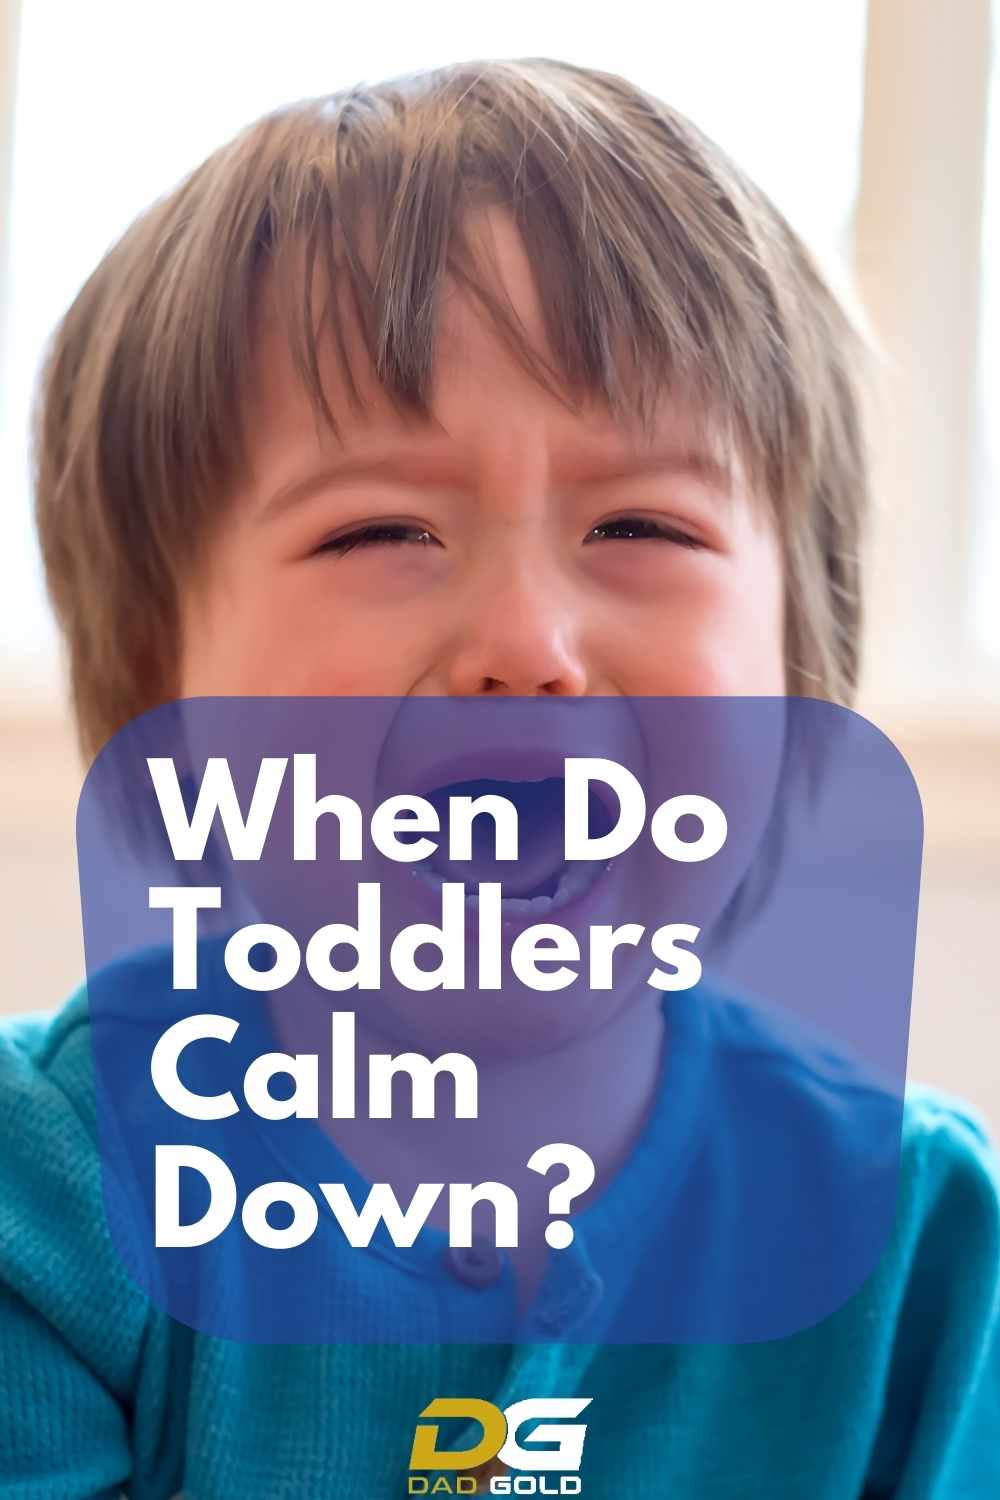 When Do Toddlers Calm Down